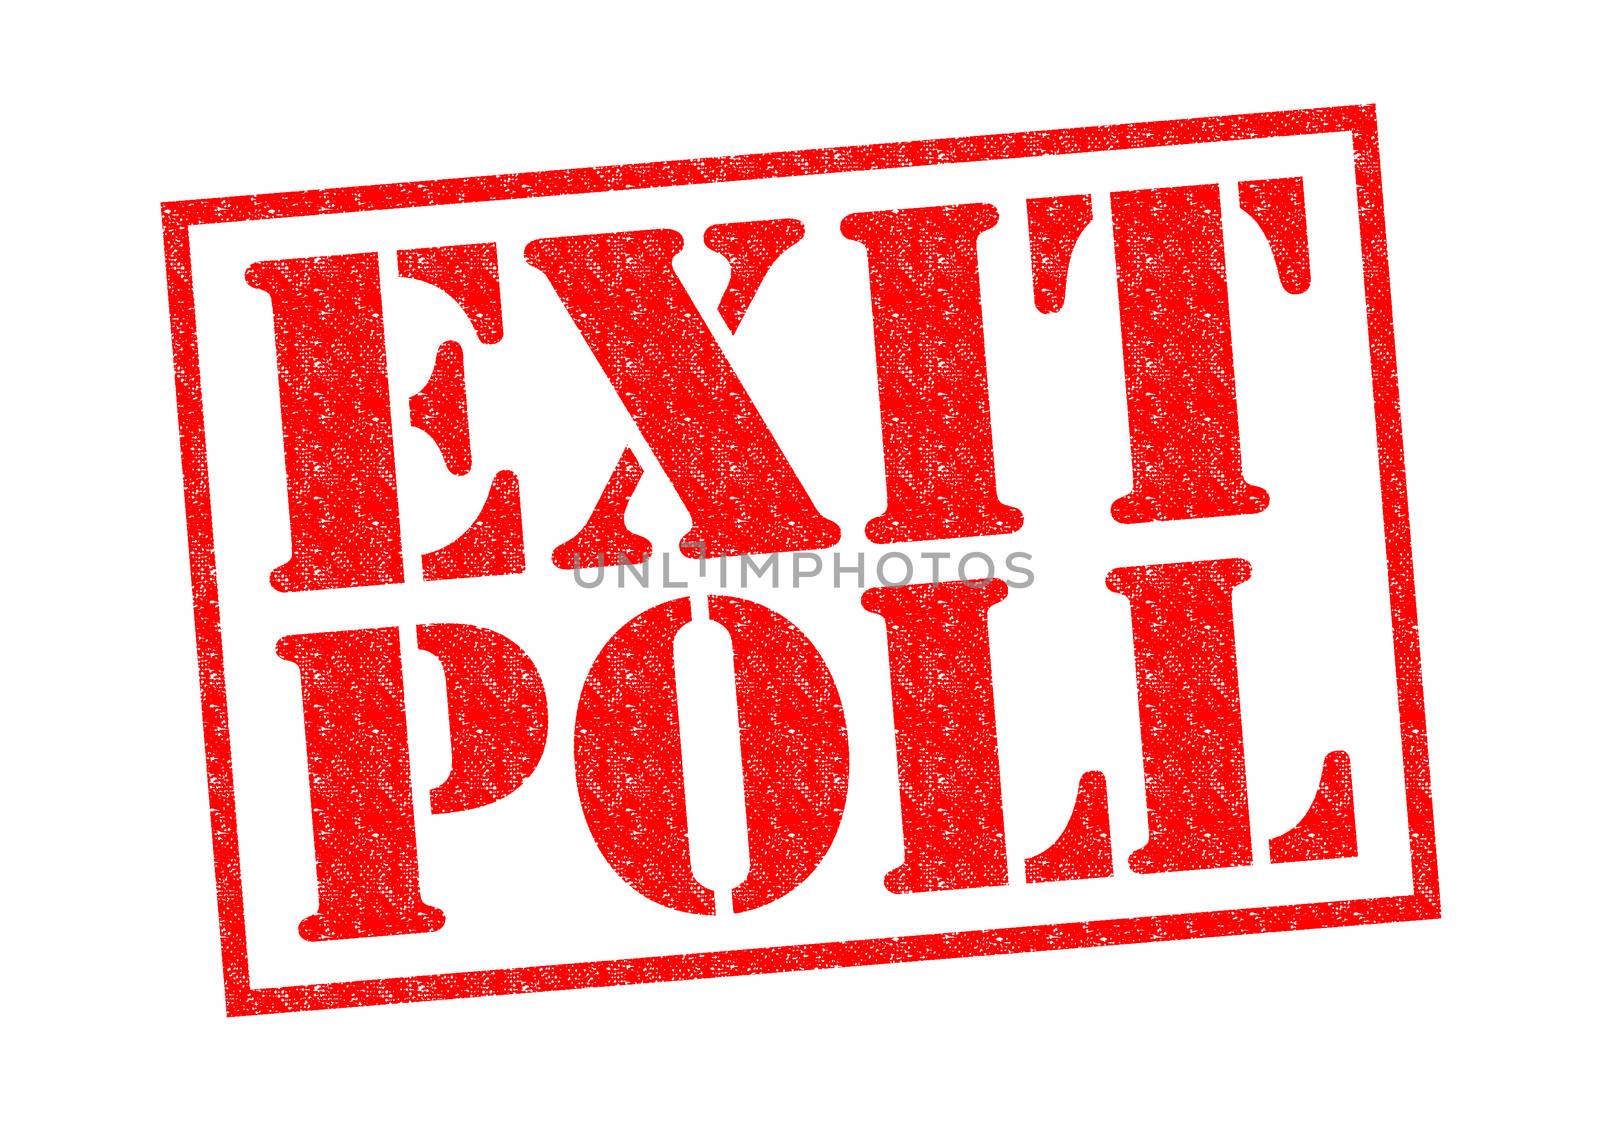 EXIT POLL red Rubber Stamp over a white background.